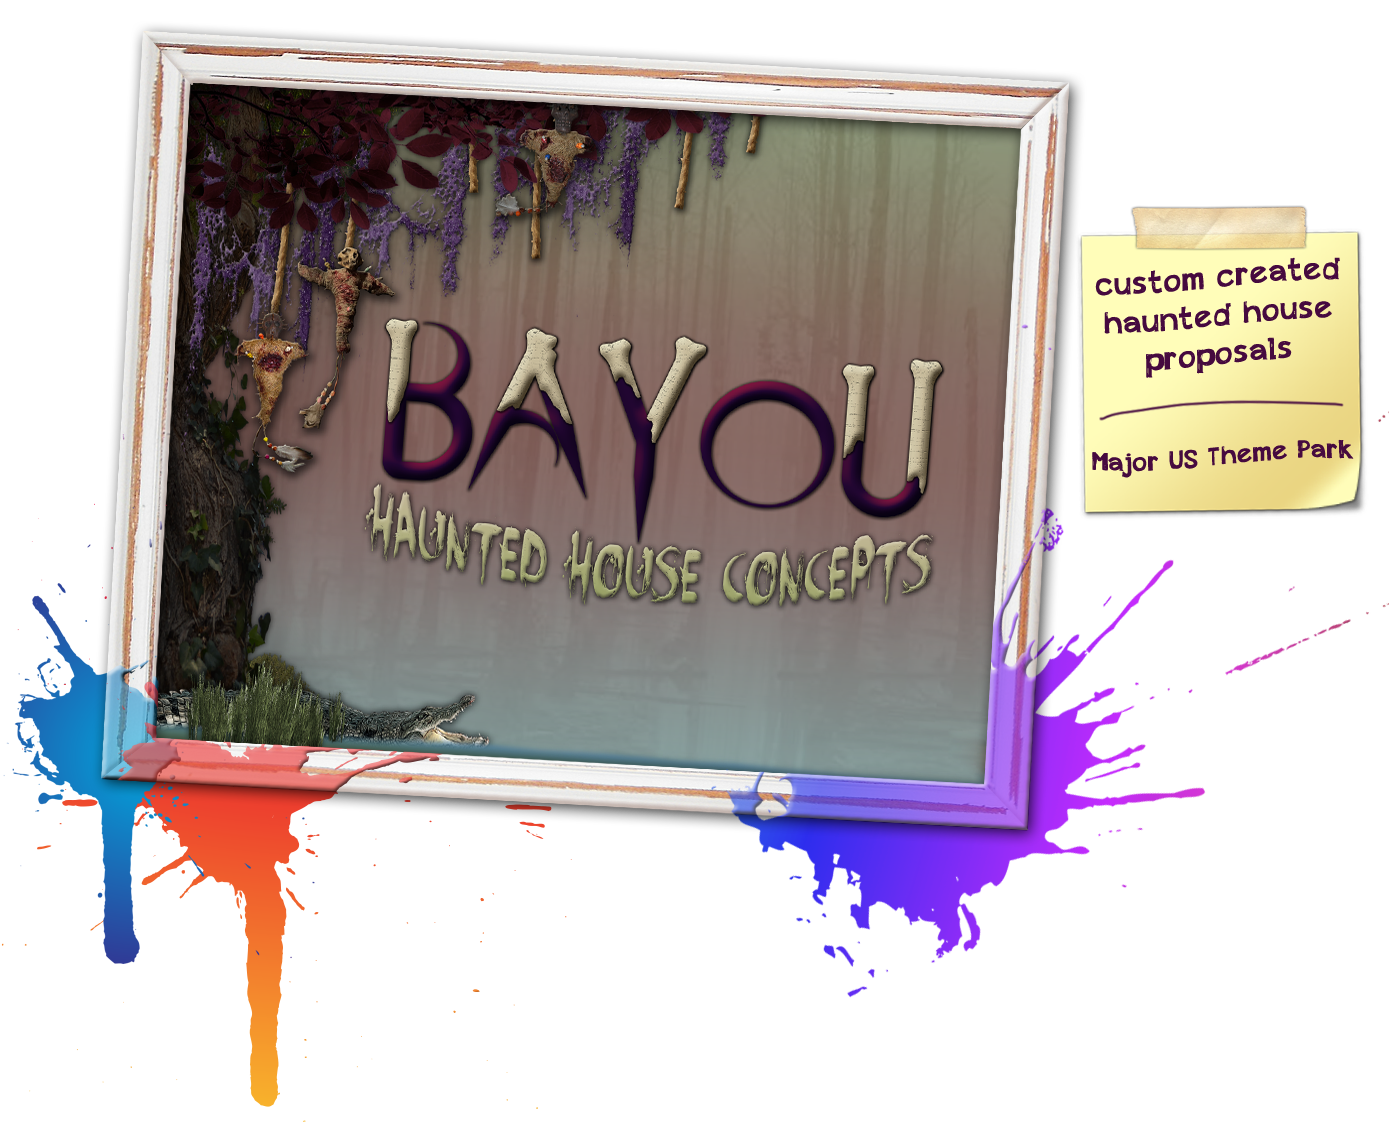 Bayou-Themed Haunt Concepts